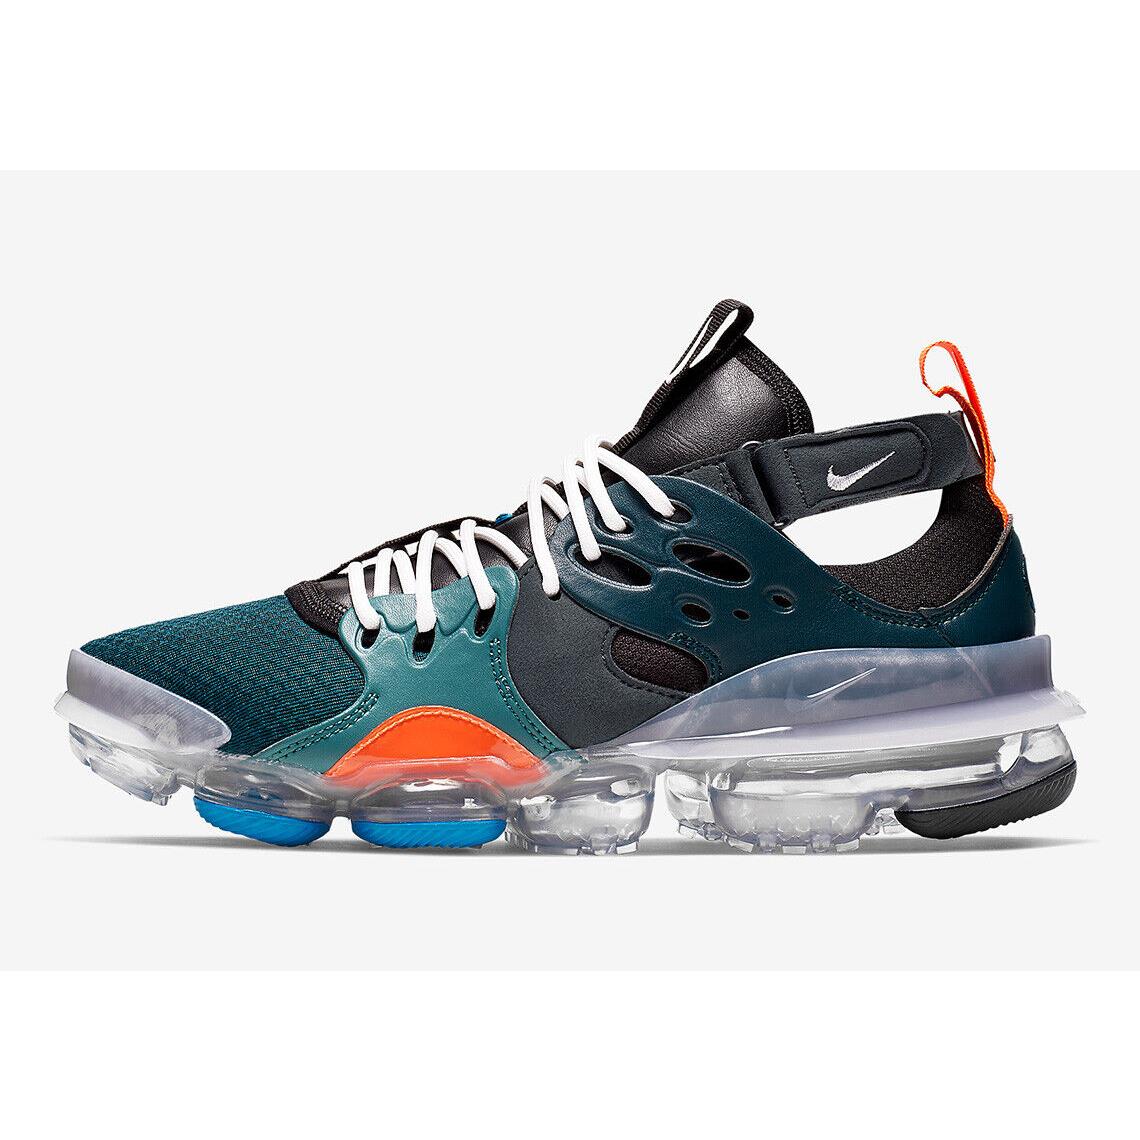 Nike Air Vapormax Dsvm Size 9.5 with Box | - Nike shoes AIR DSVM VAPORMAX - Midnight Turquoise/White-Mineral Teal-Hyper Crimso | SporTipTop